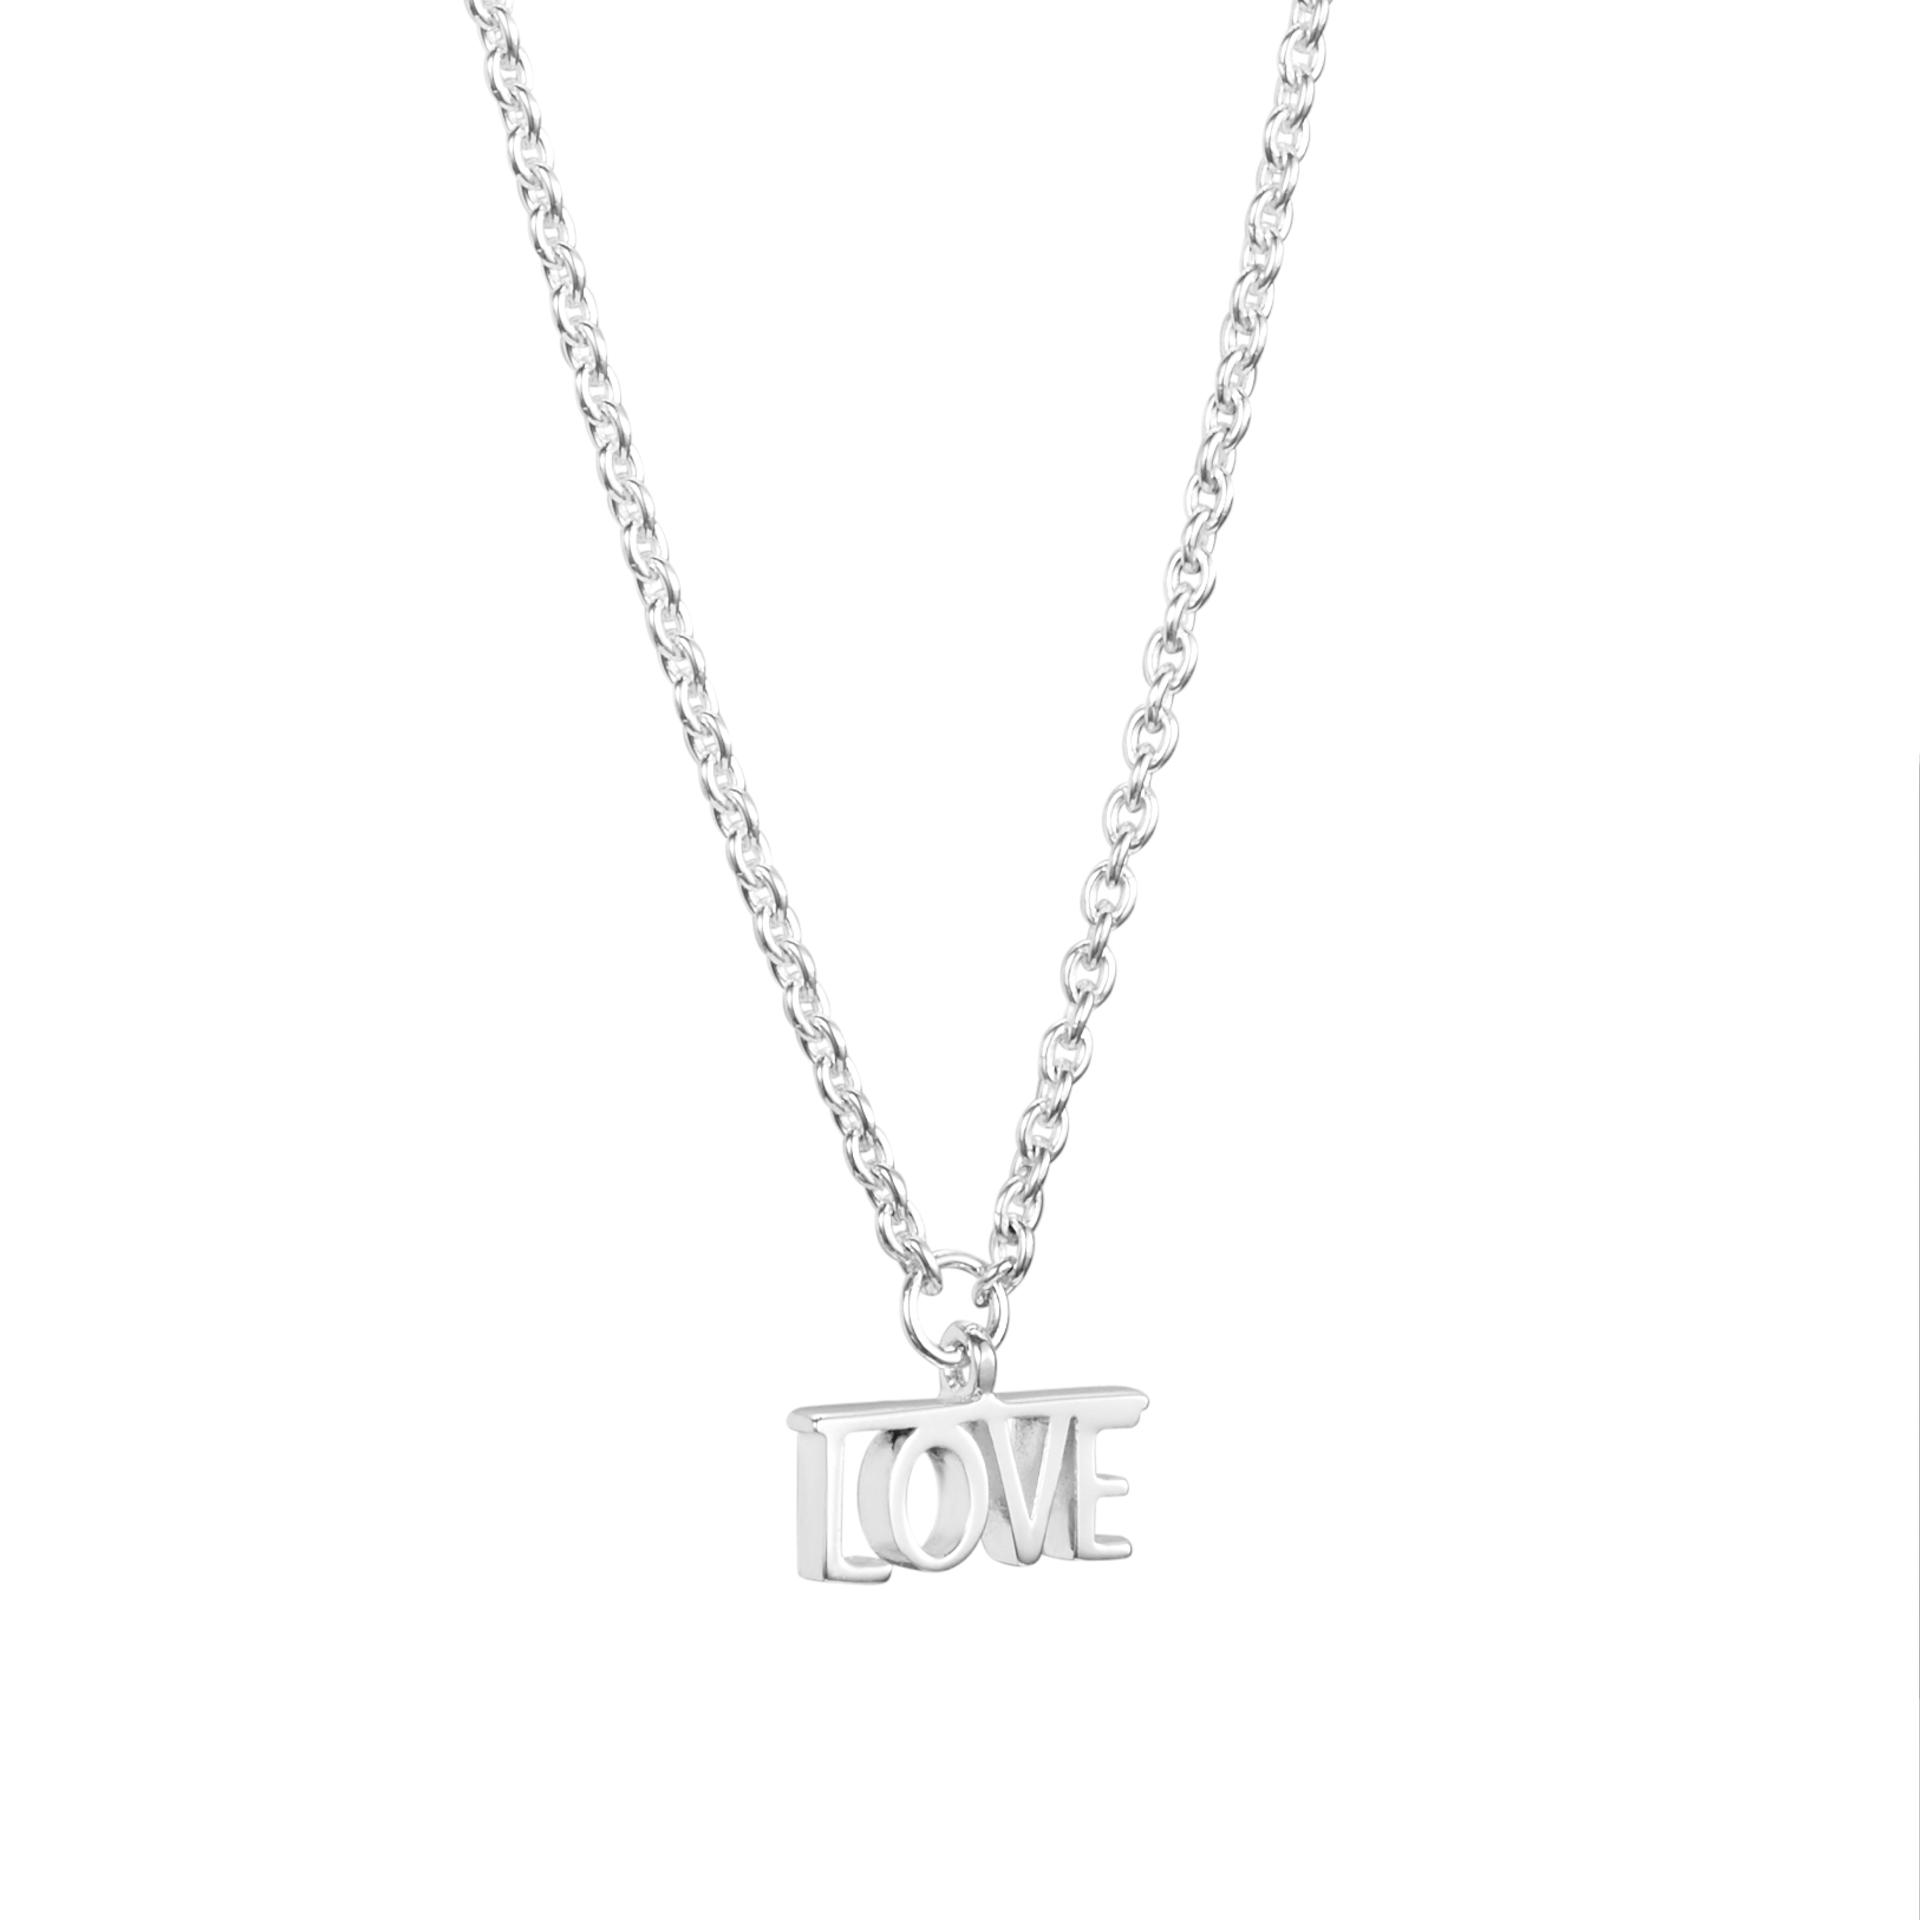 LOVE NECKLACE.